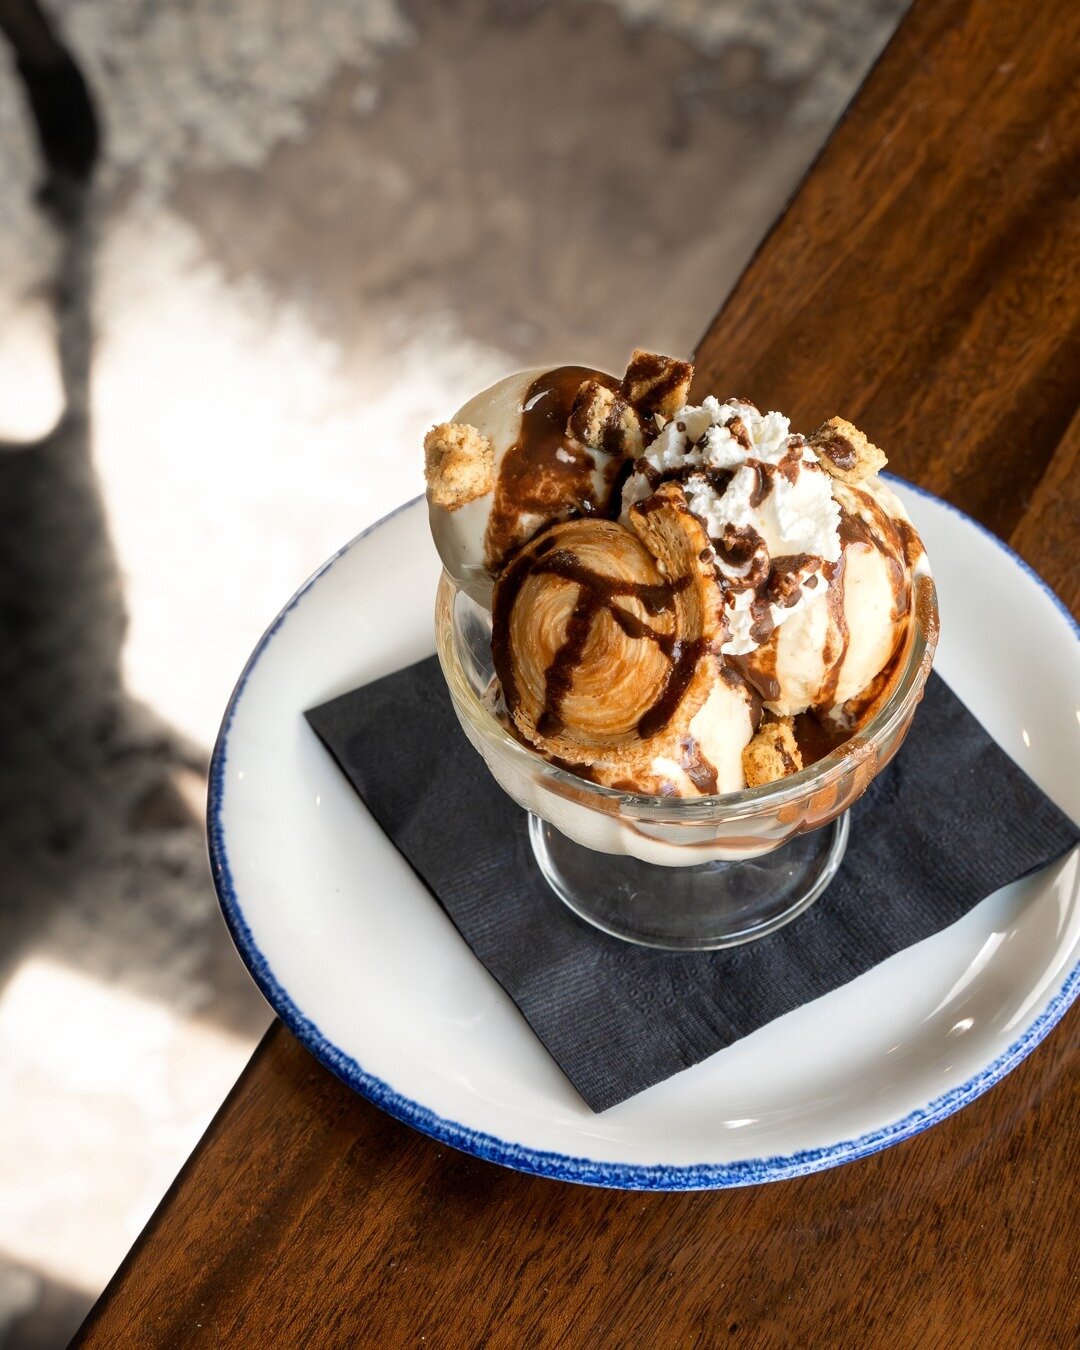 Housemade ice cream, say no more.⁠
⁠
Come and try all of Pastry Chef Barbier's creations to end your meal.⁠
⁠
Last call at 10 pm!